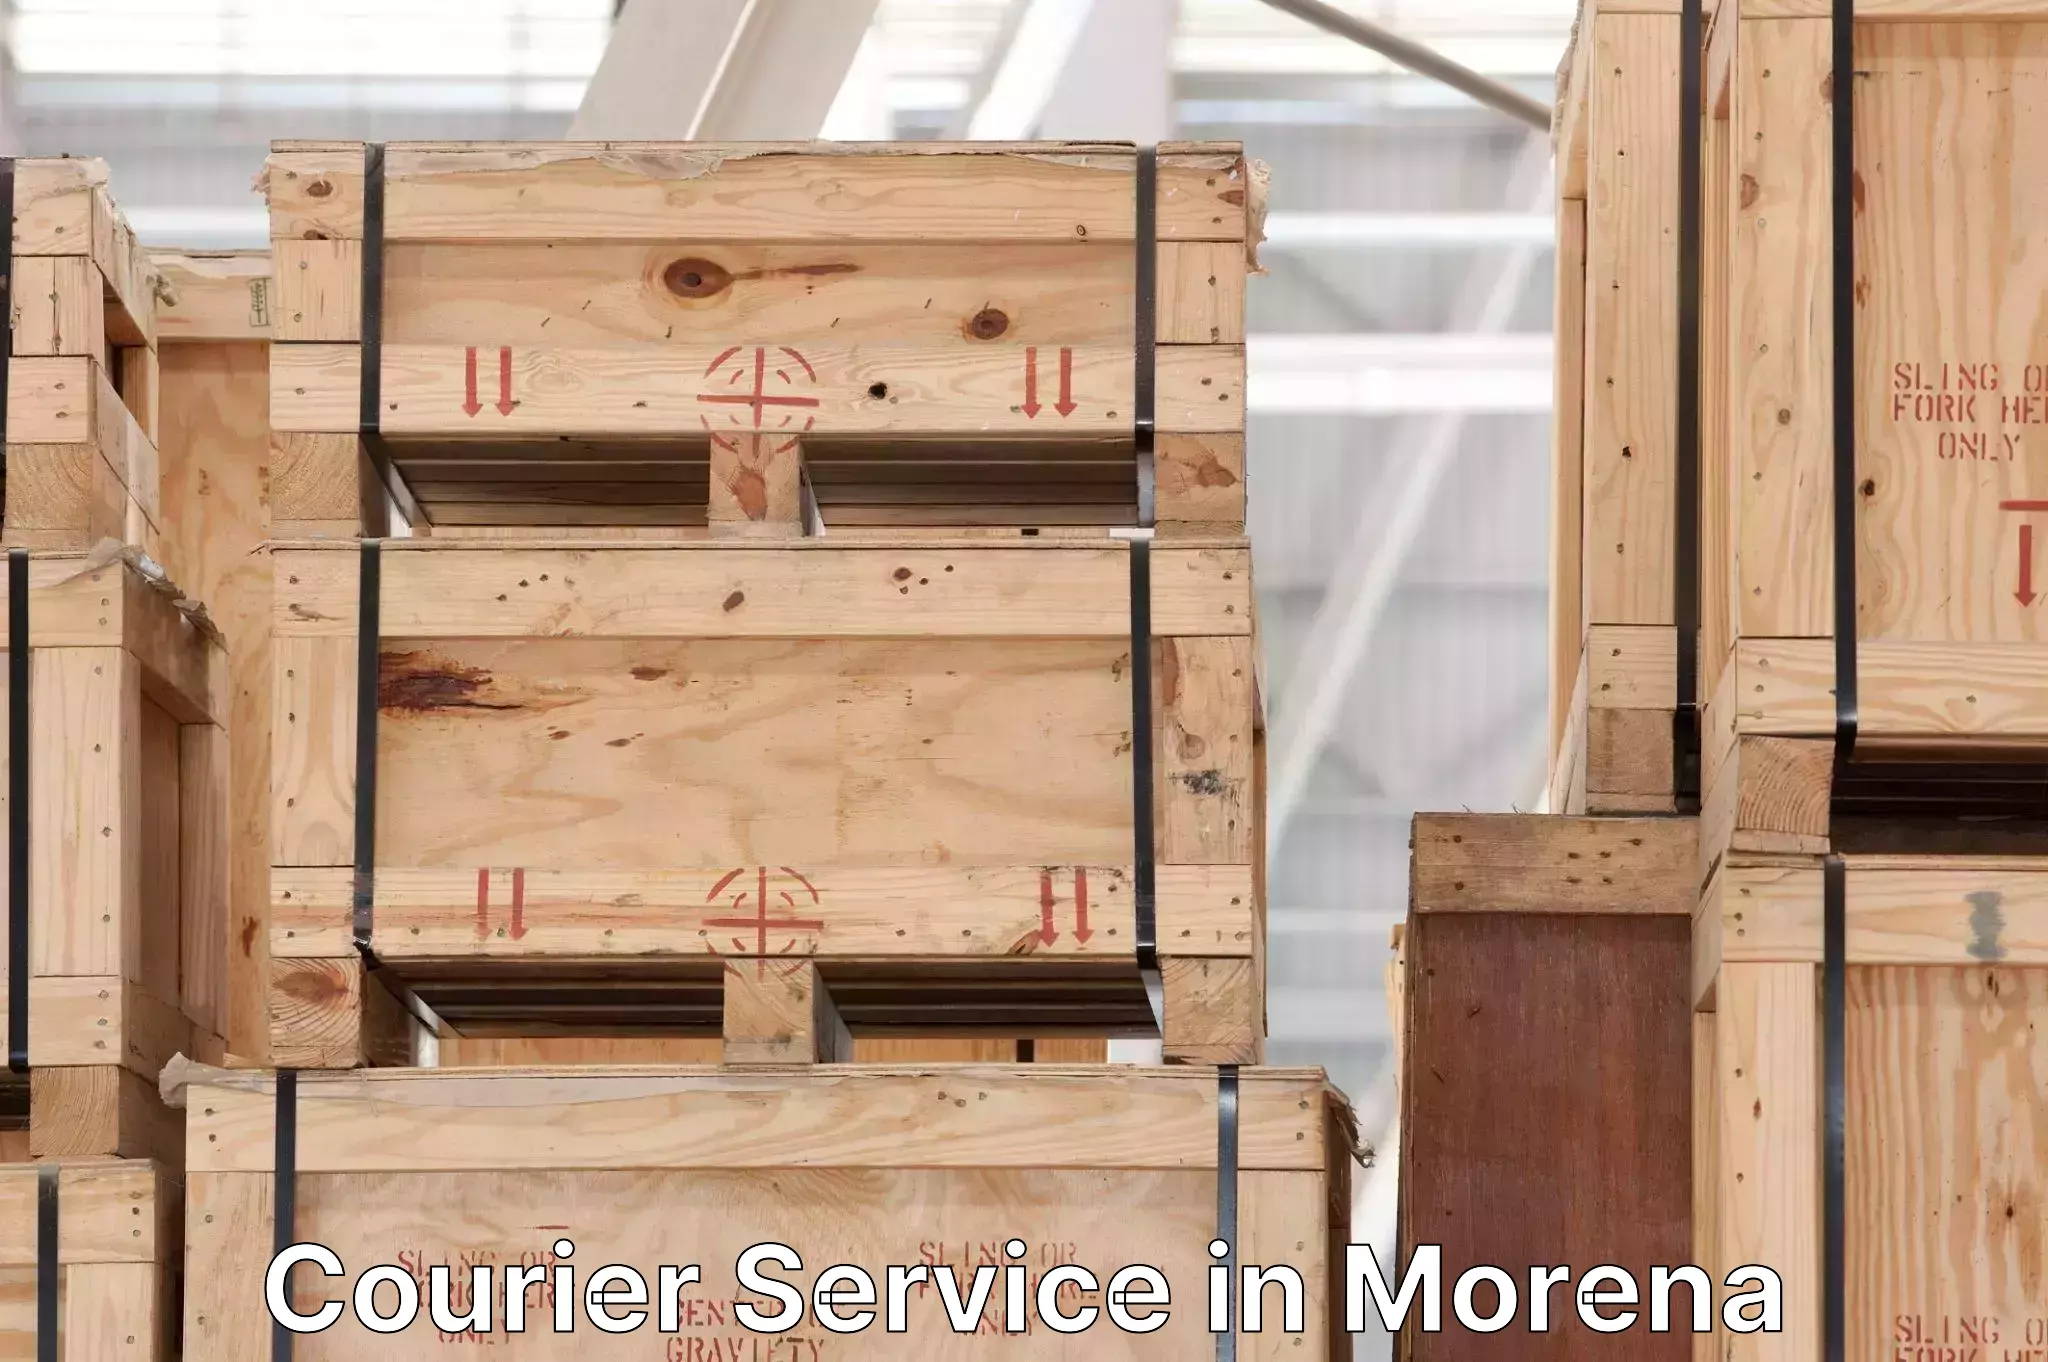 Enhanced shipping experience in Morena